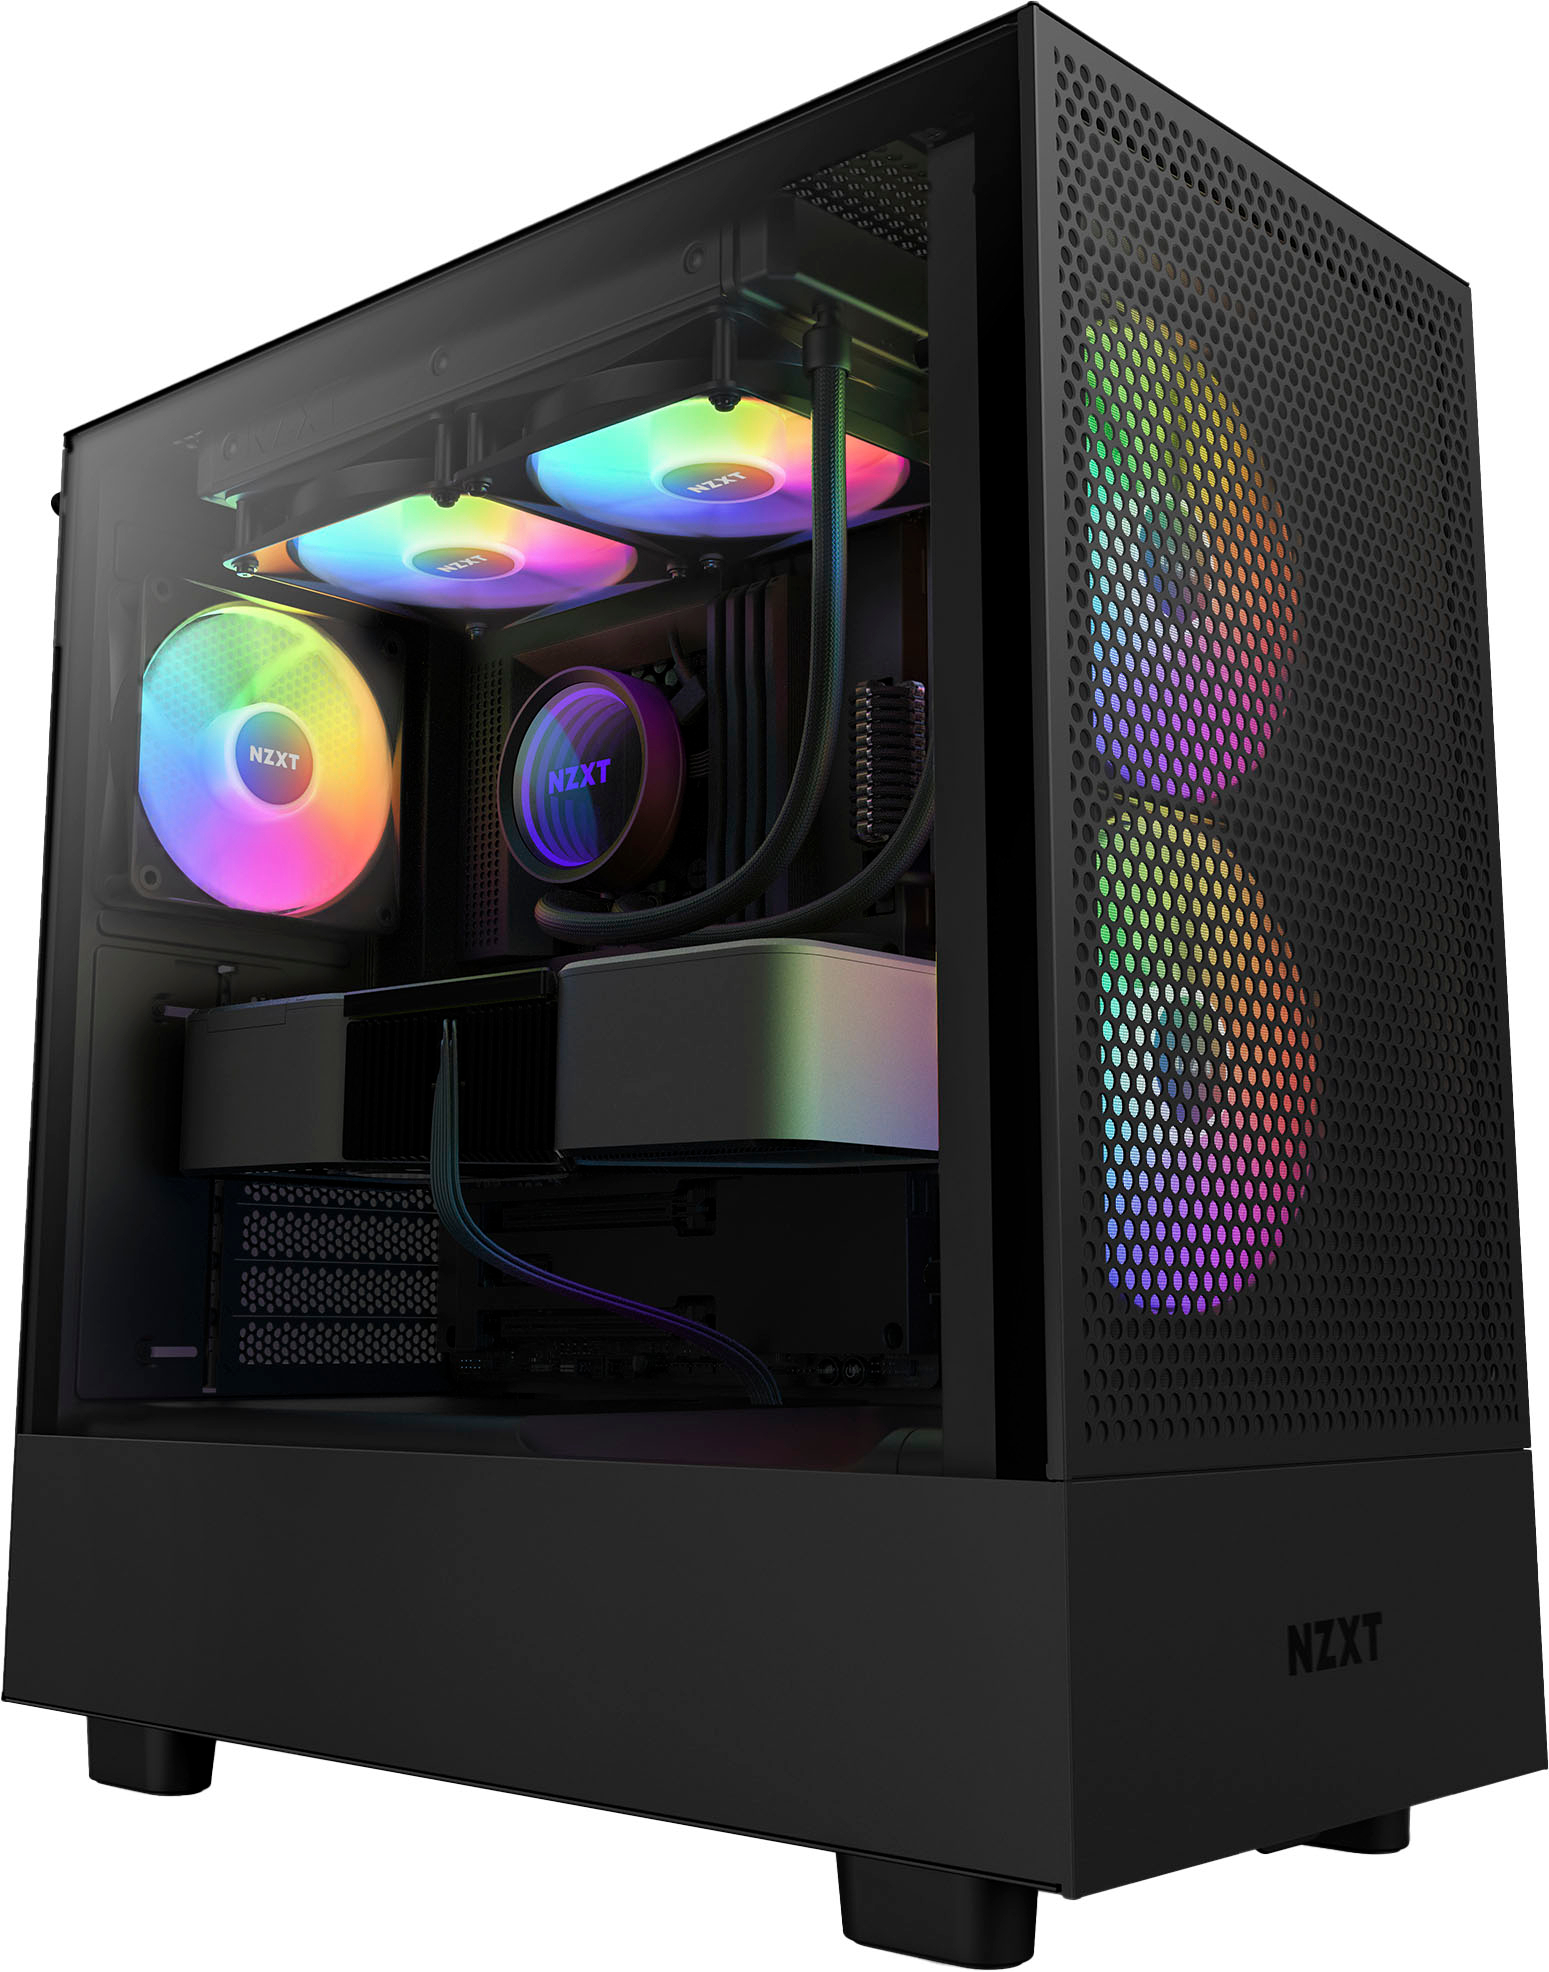 NZXT H5 Elite Review: The Perfect Case For Your Gaming PC?